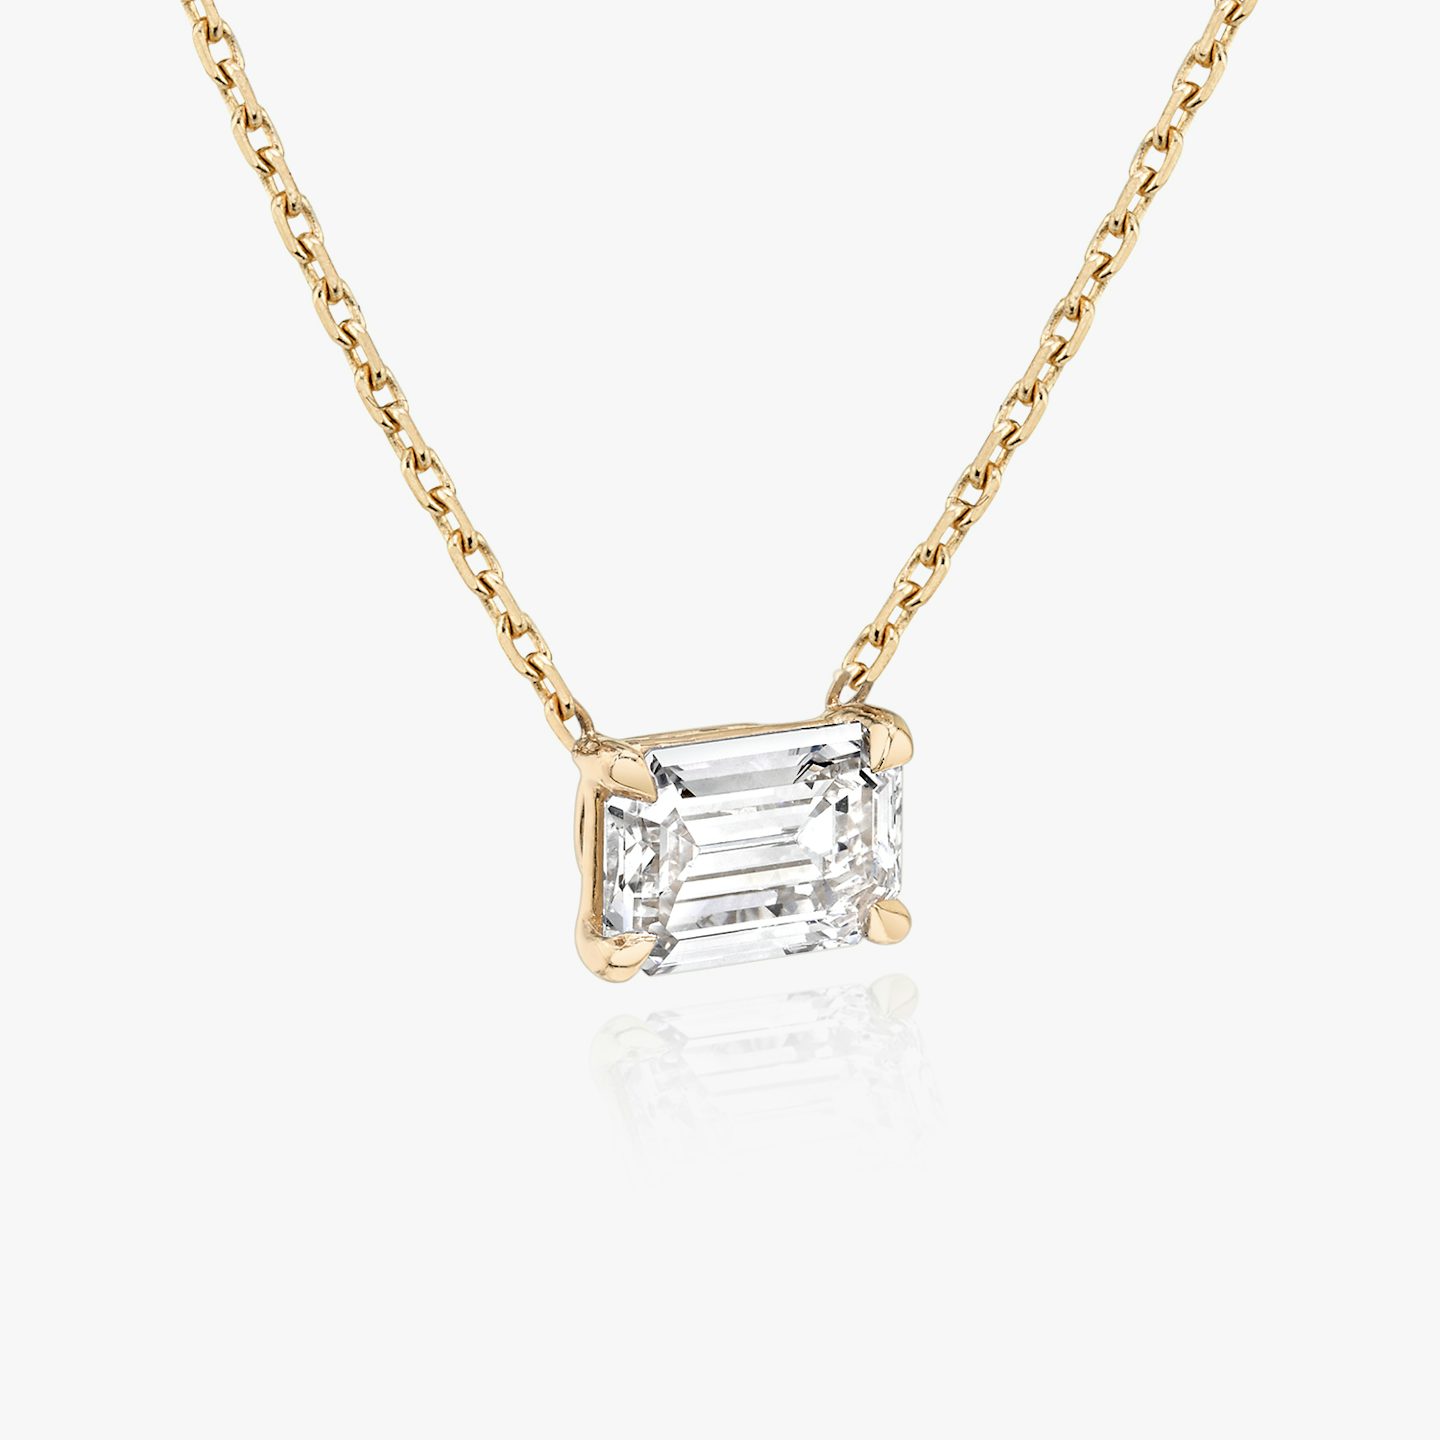 VRAI Solitaire Necklace | Emerald | 14k | 14k Rose Gold | Carat weight: 1/4